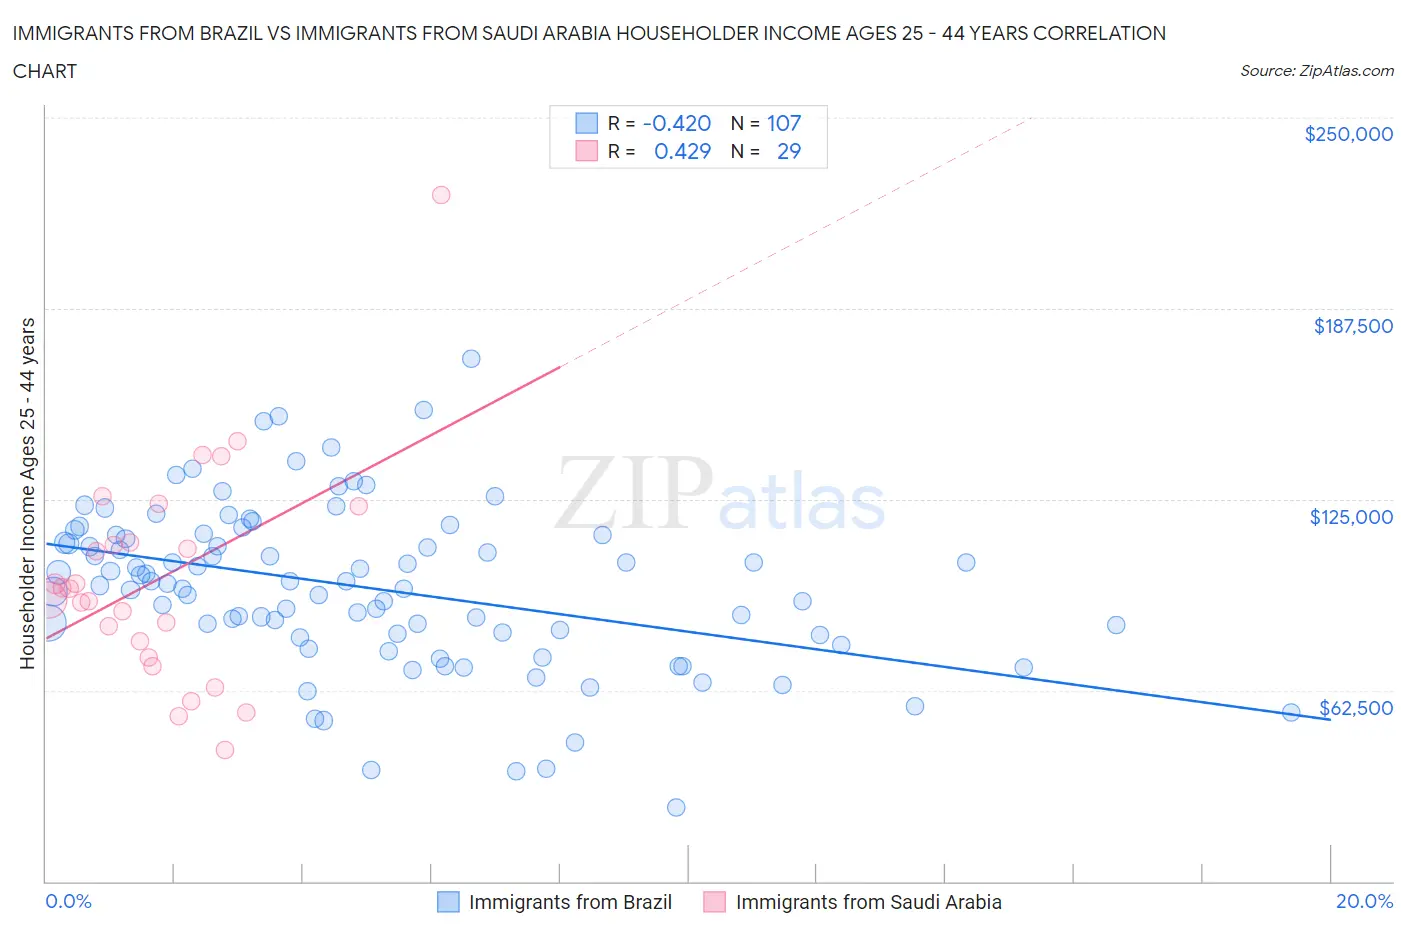 Immigrants from Brazil vs Immigrants from Saudi Arabia Householder Income Ages 25 - 44 years